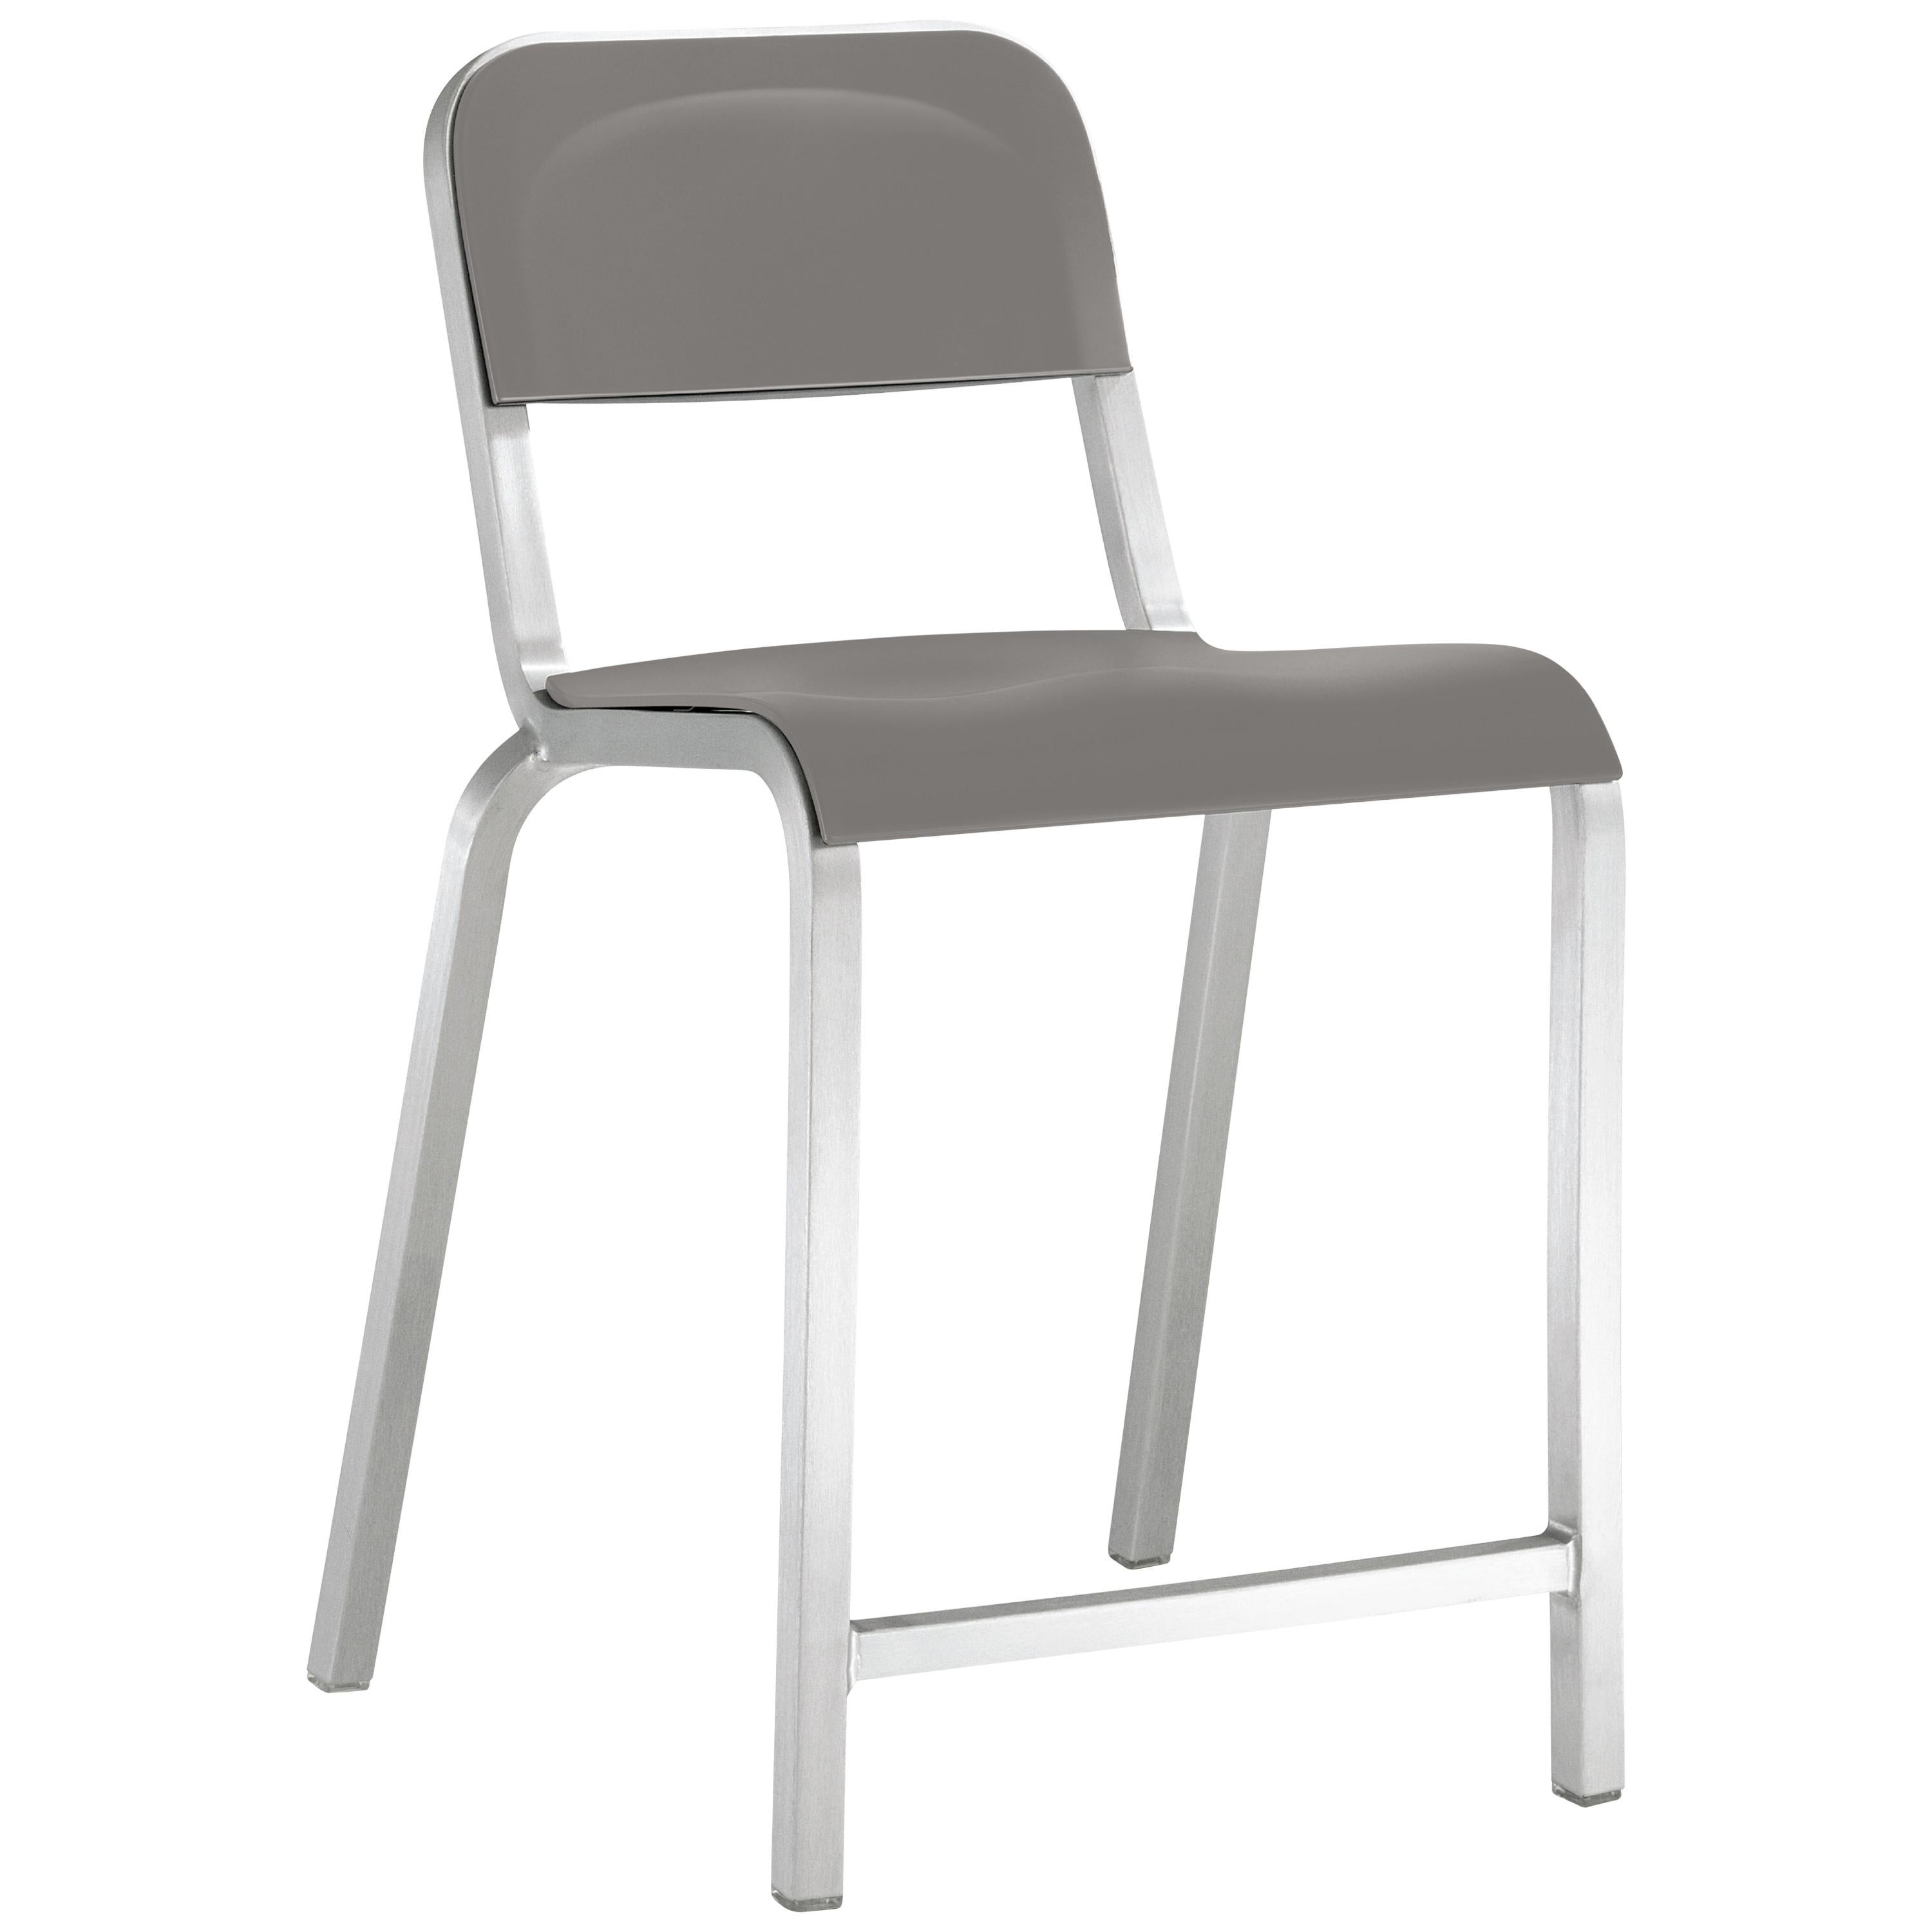 Emeco 1951 Aluminum Counter Stool with Flint Gray Seat by Adrian Van Hooydonk For Sale